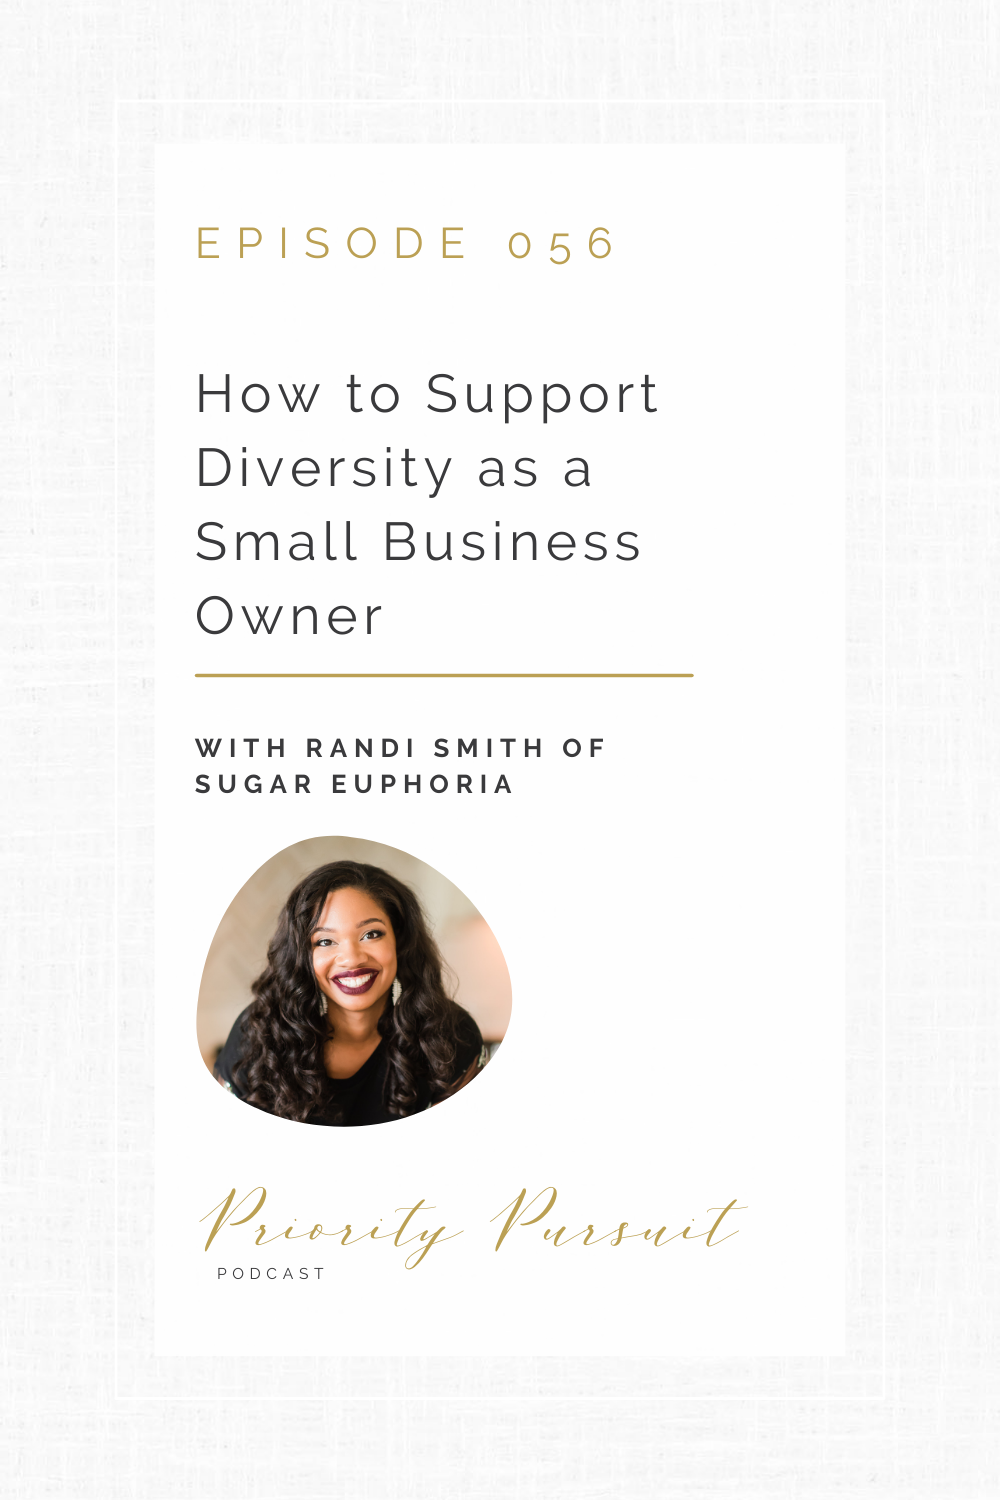 Victoria Rayburn and Randi Smith discuss how to support diversity as a small business owner. 